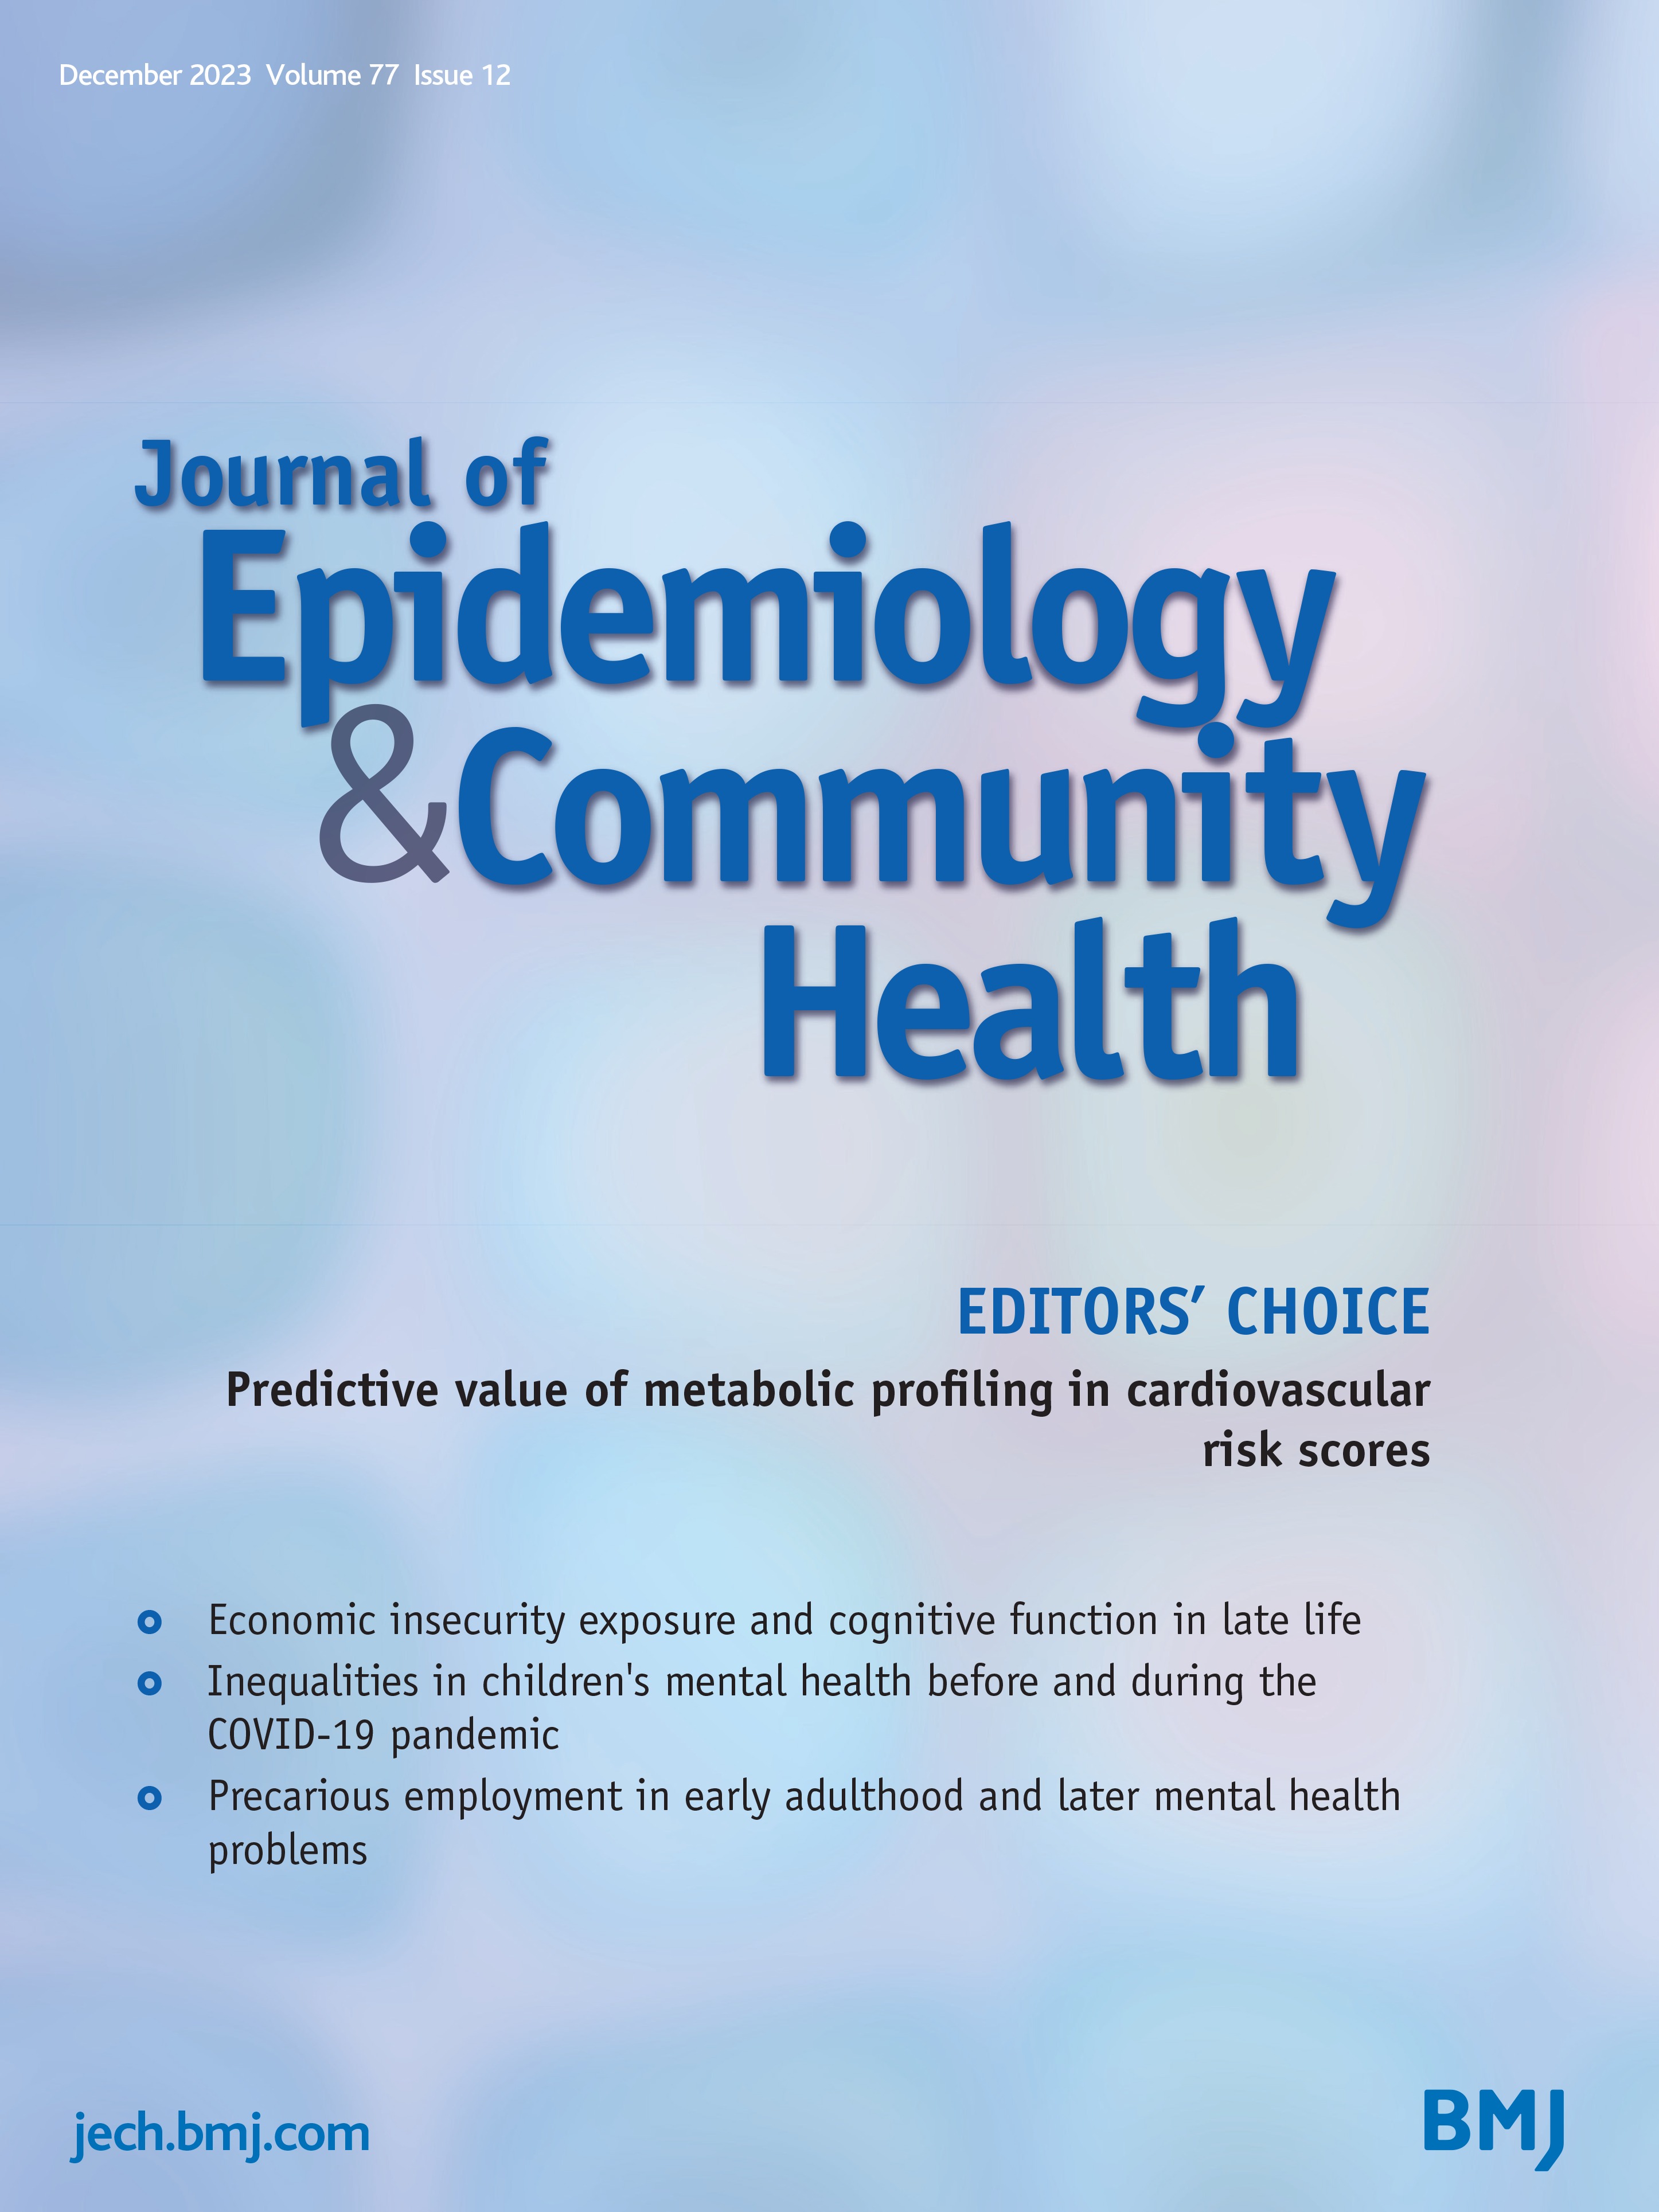 Inequalities in childrens mental health before and during the COVID-19 pandemic: findings from the UK Household Longitudinal Study